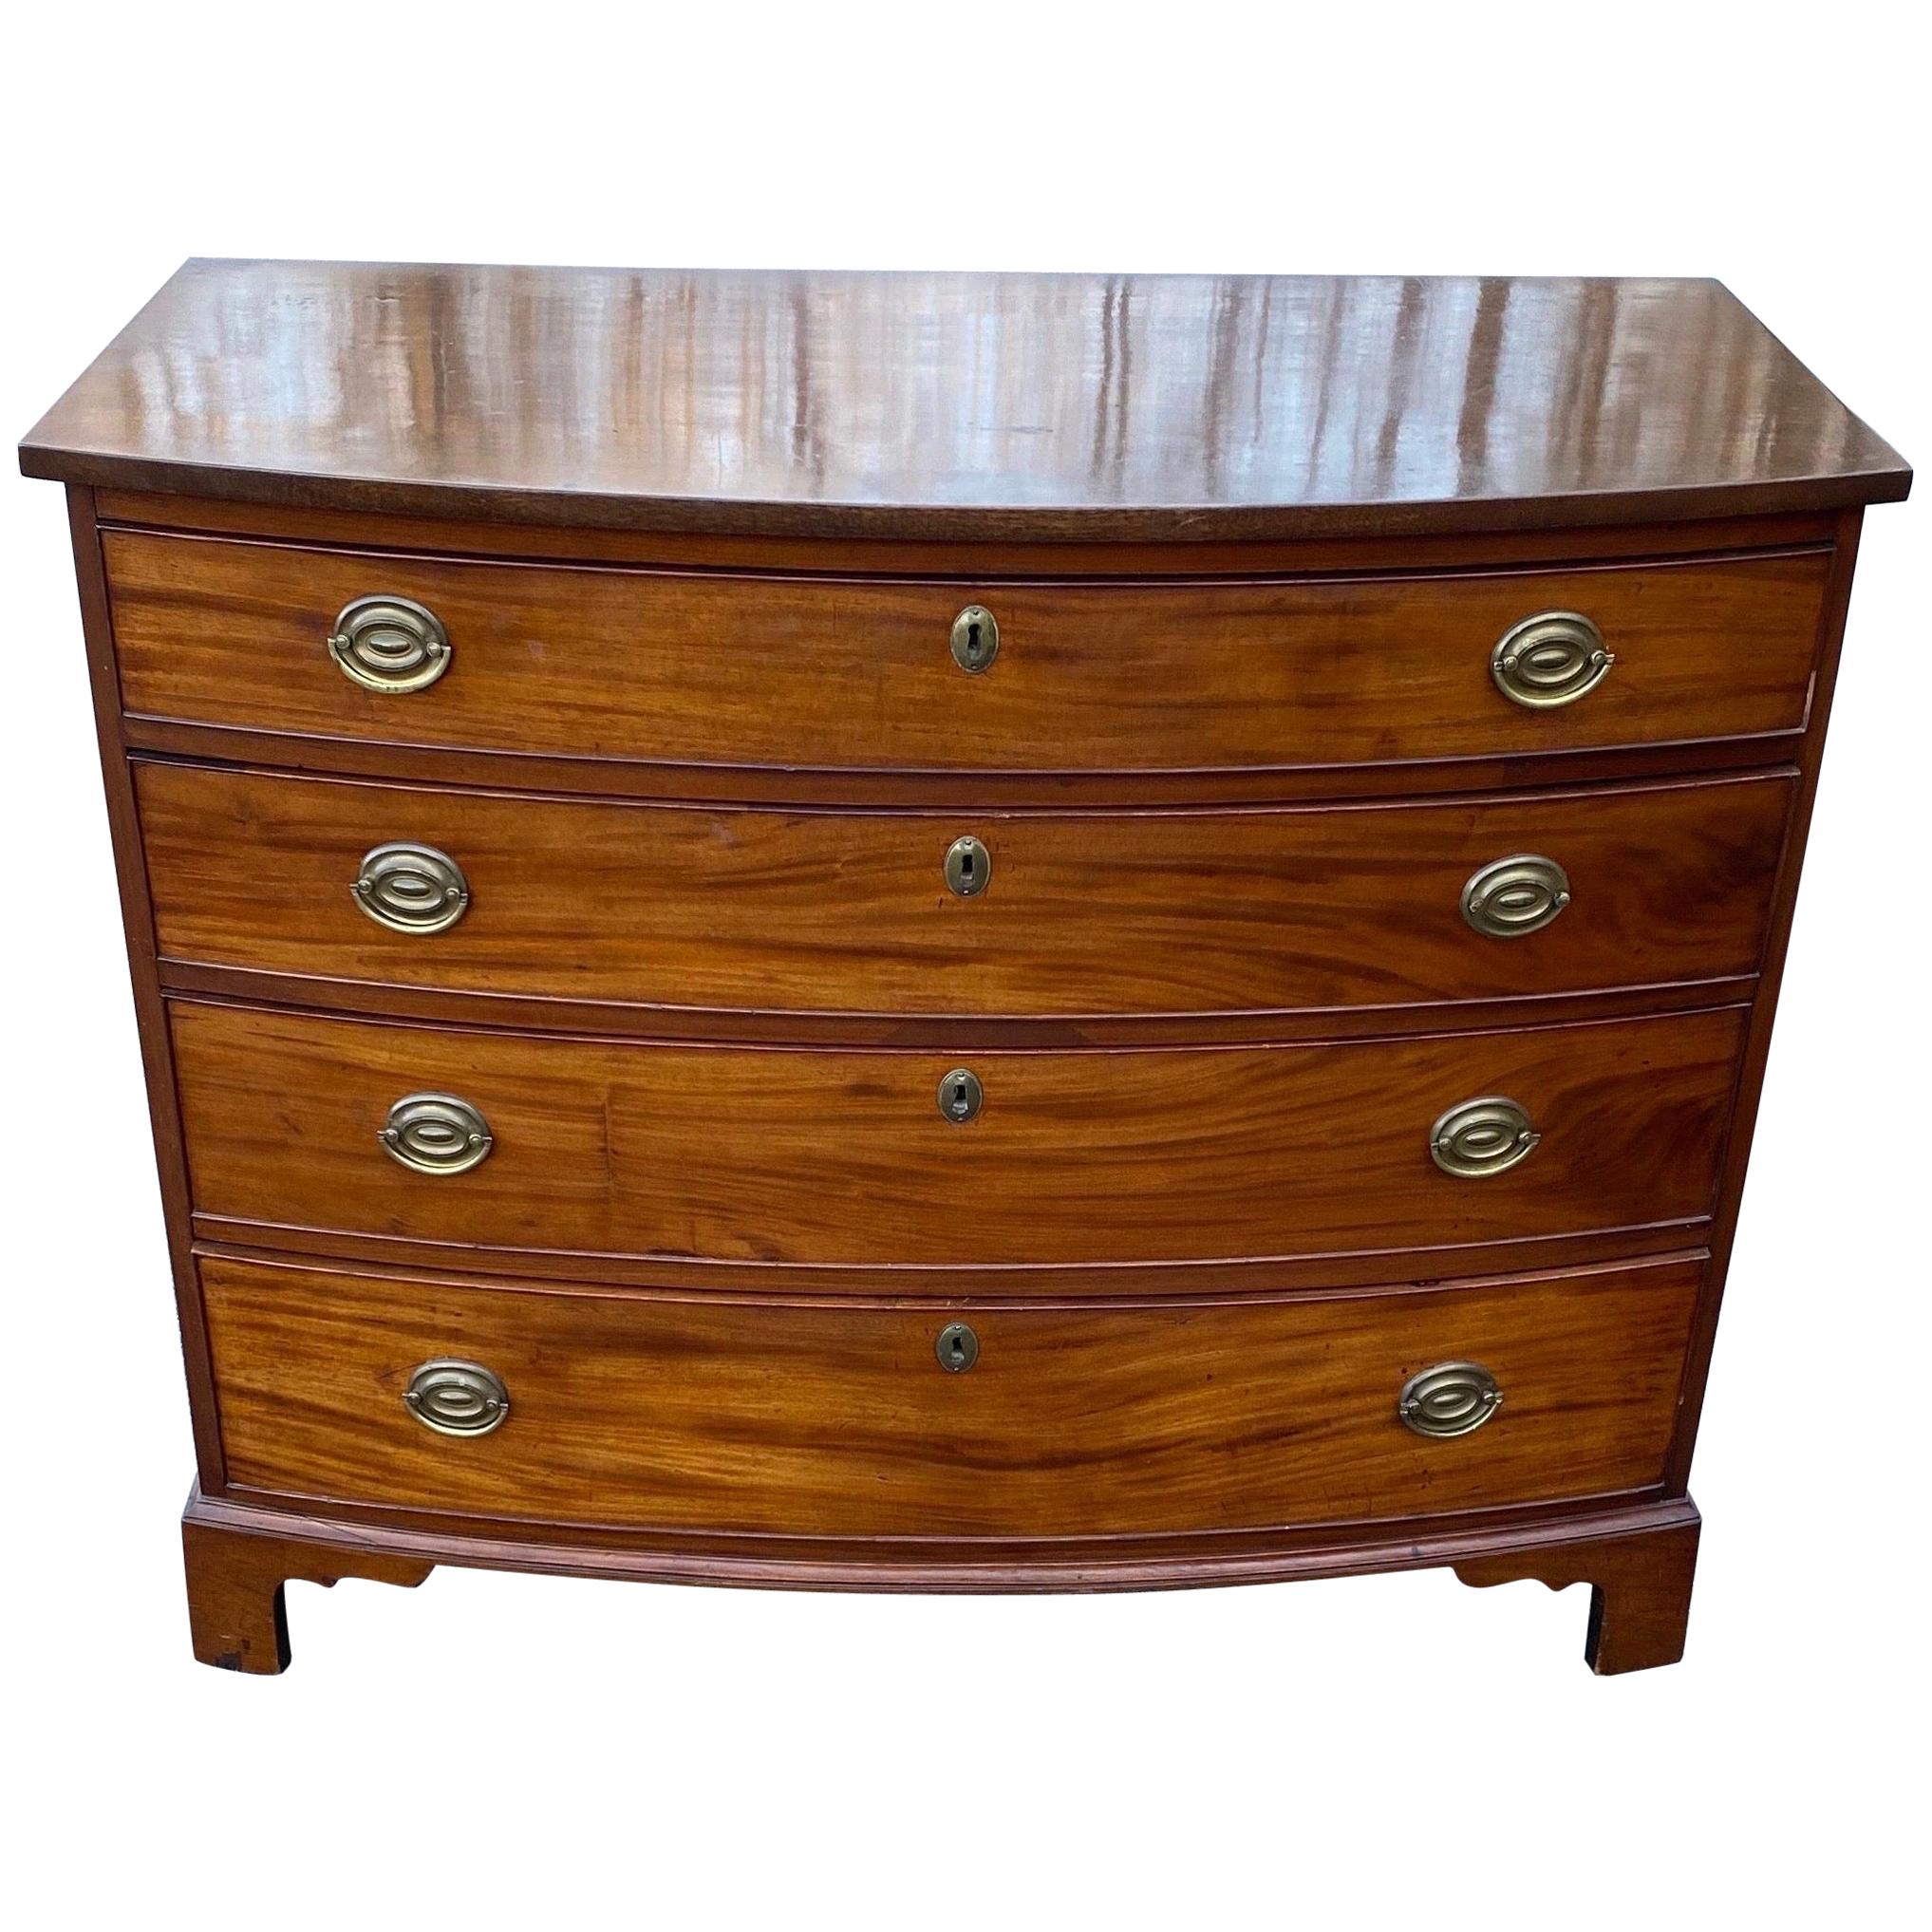 19th Century English 4-Drawer Bowfront Chest of Drawers with Figured Mahogany For Sale